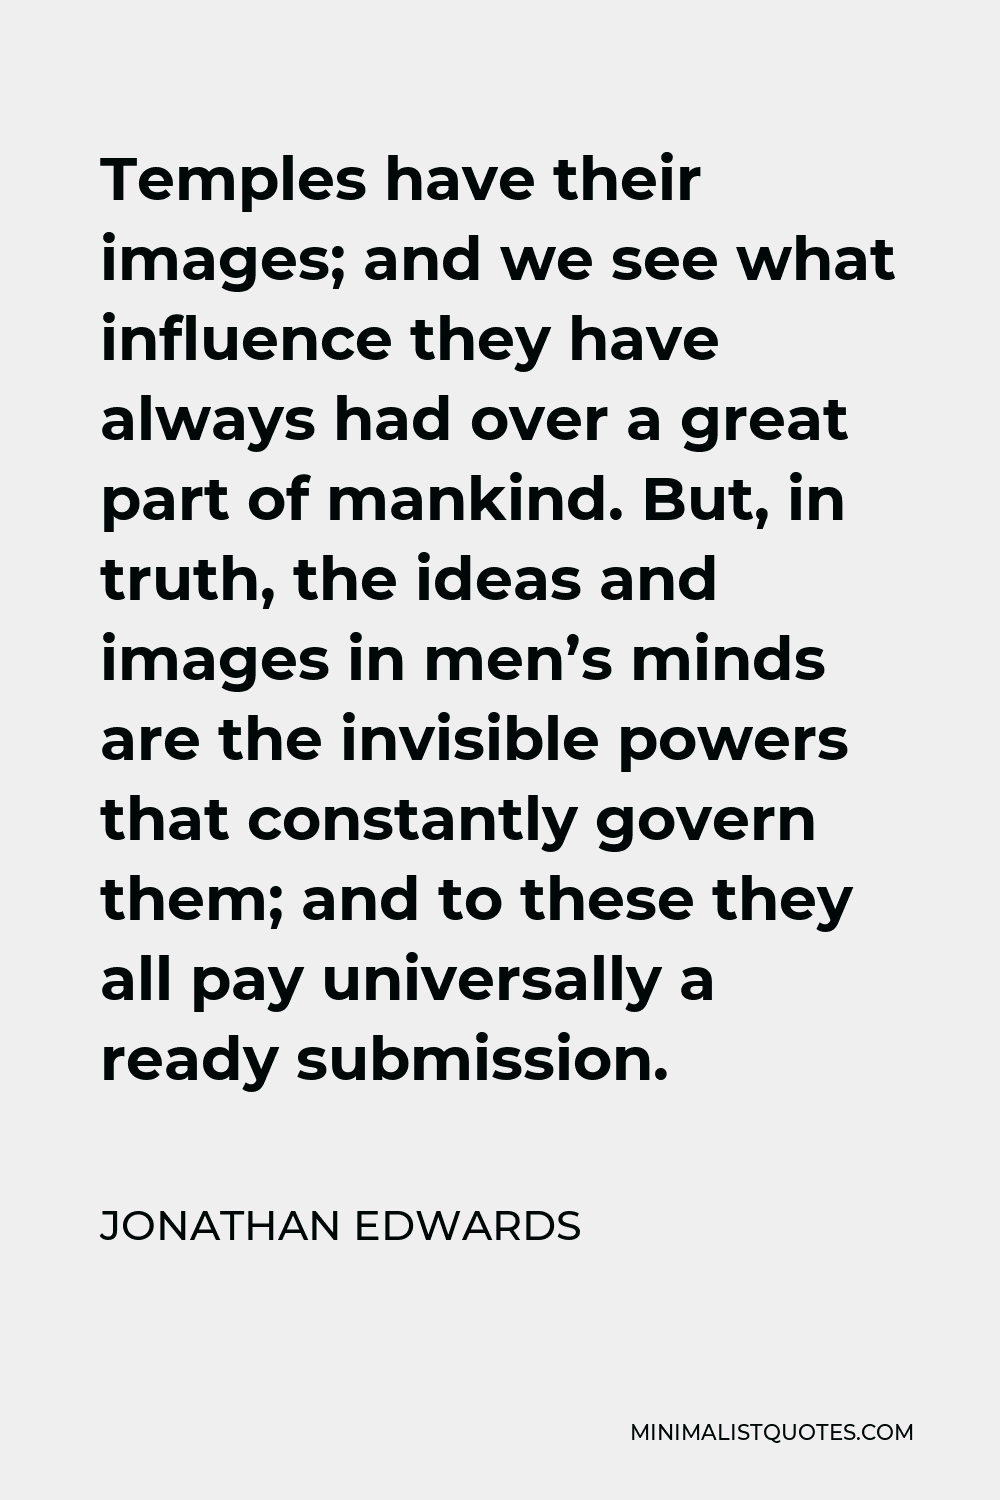 Jonathan Edwards Quote - Temples have their images; and we see what influence they have always had over a great part of mankind. But, in truth, the ideas and images in men’s minds are the invisible powers that constantly govern them; and to these they all pay universally a ready submission.